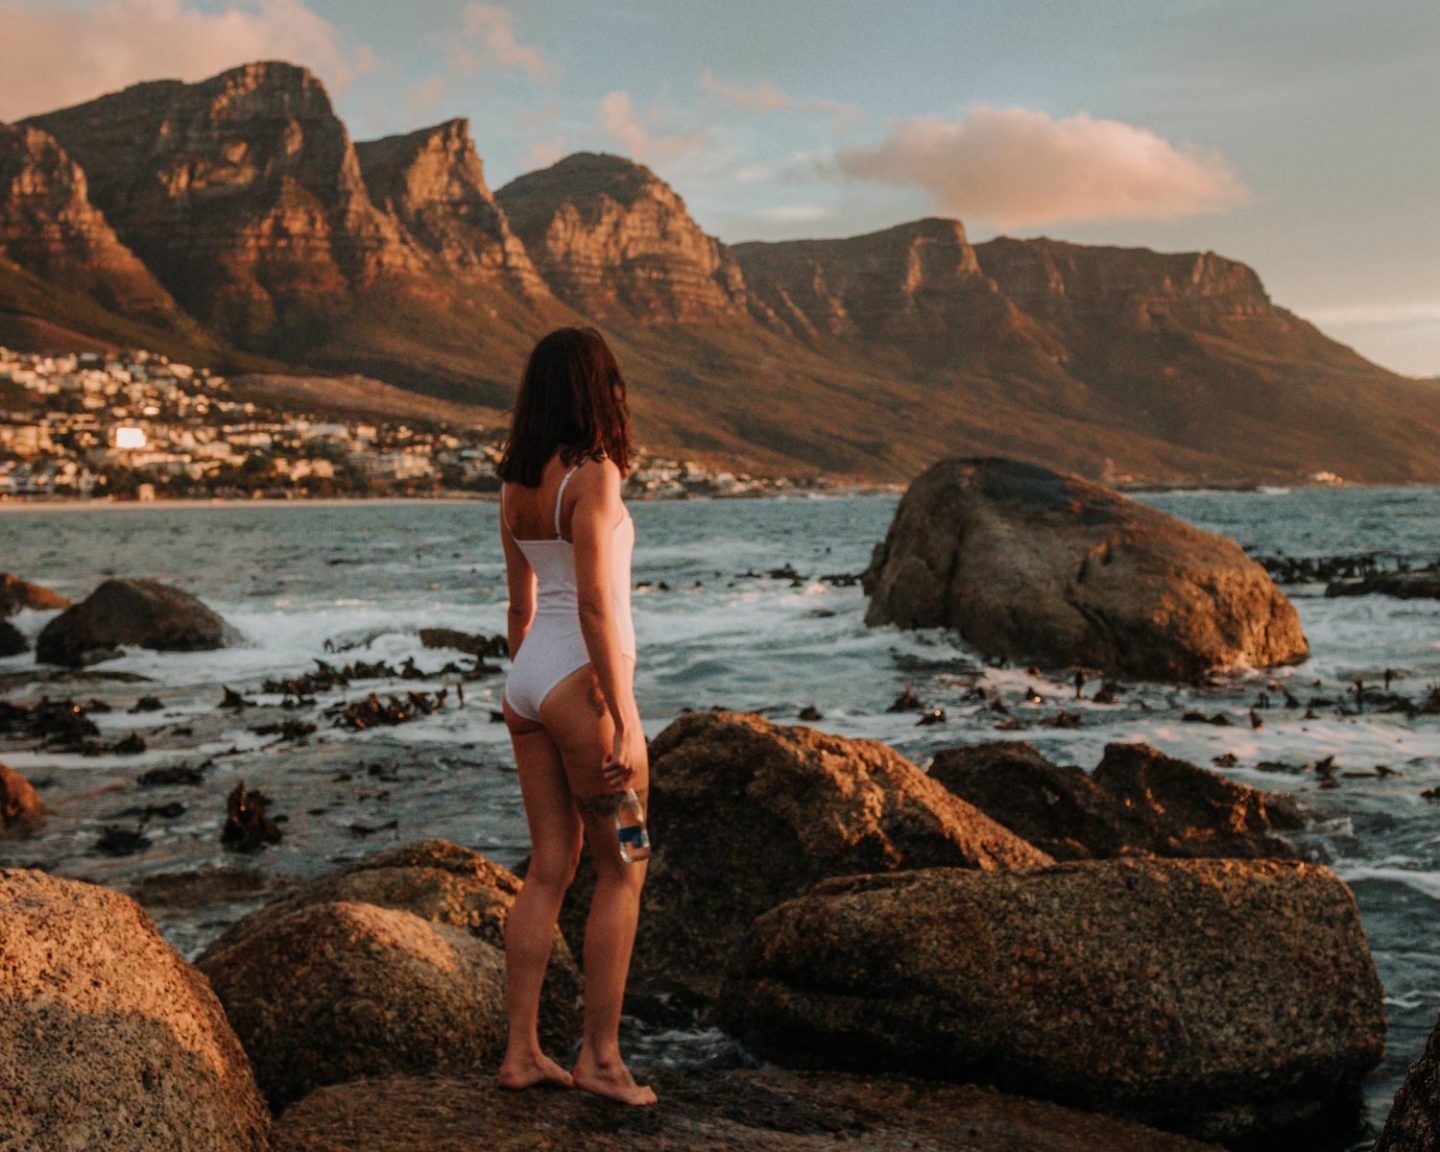 lauren standing on a rock at maidens cove in cape town